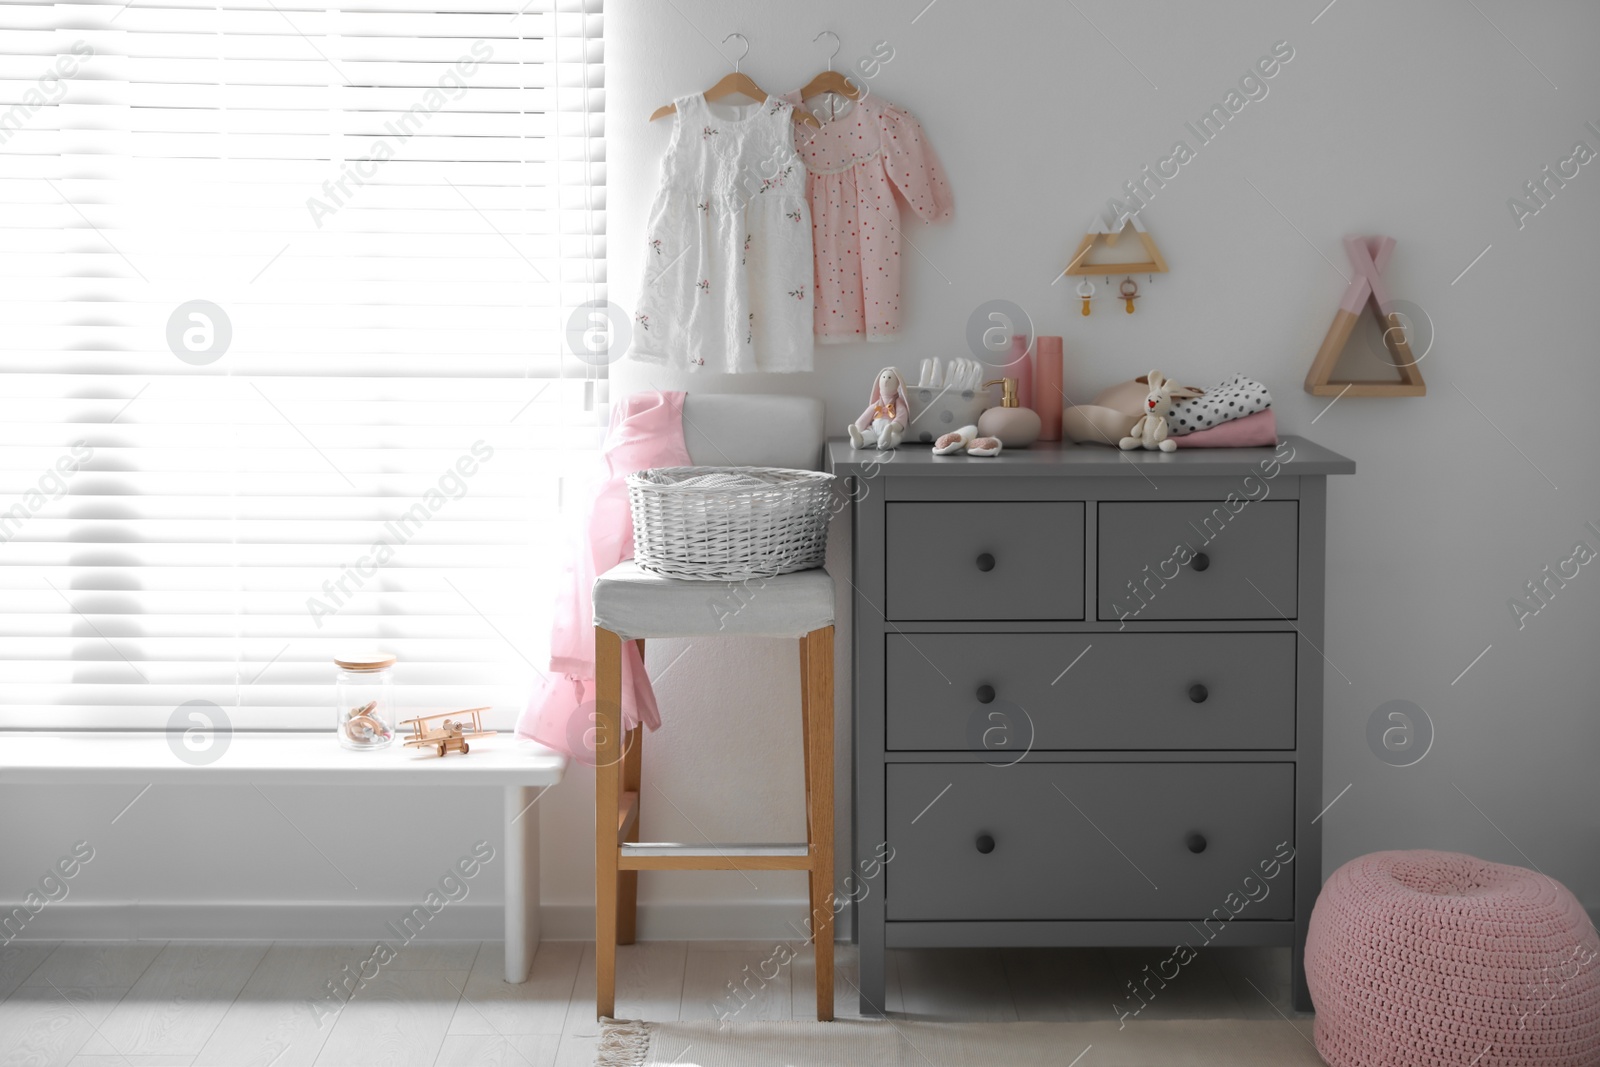 Photo of Stylish chest of drawers and accessories in child room